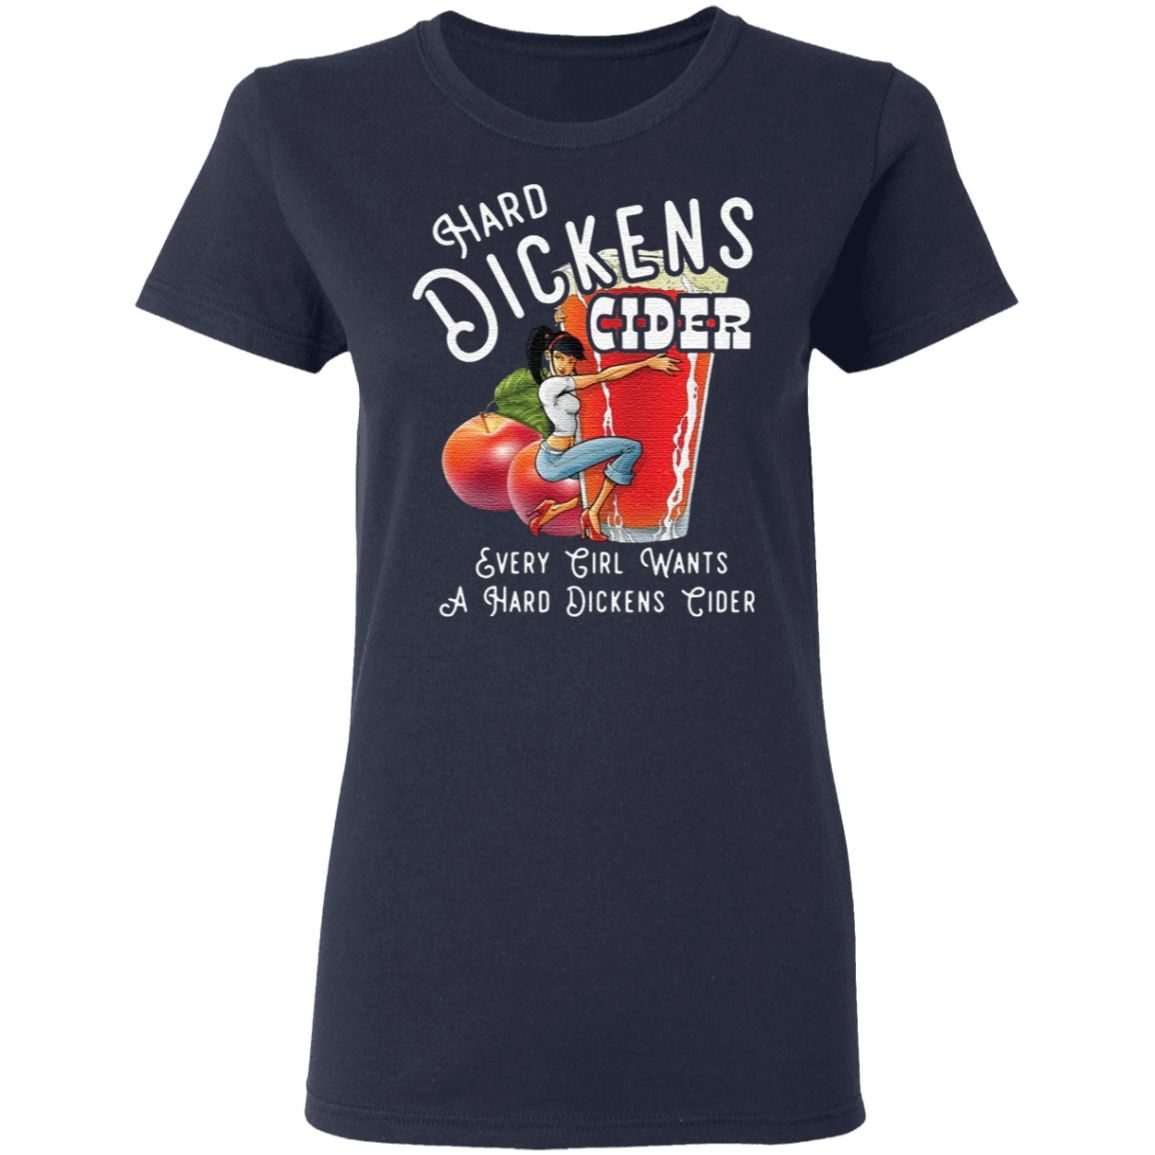 Hard dickens cider every girl wants a hard dickens cider t shirt